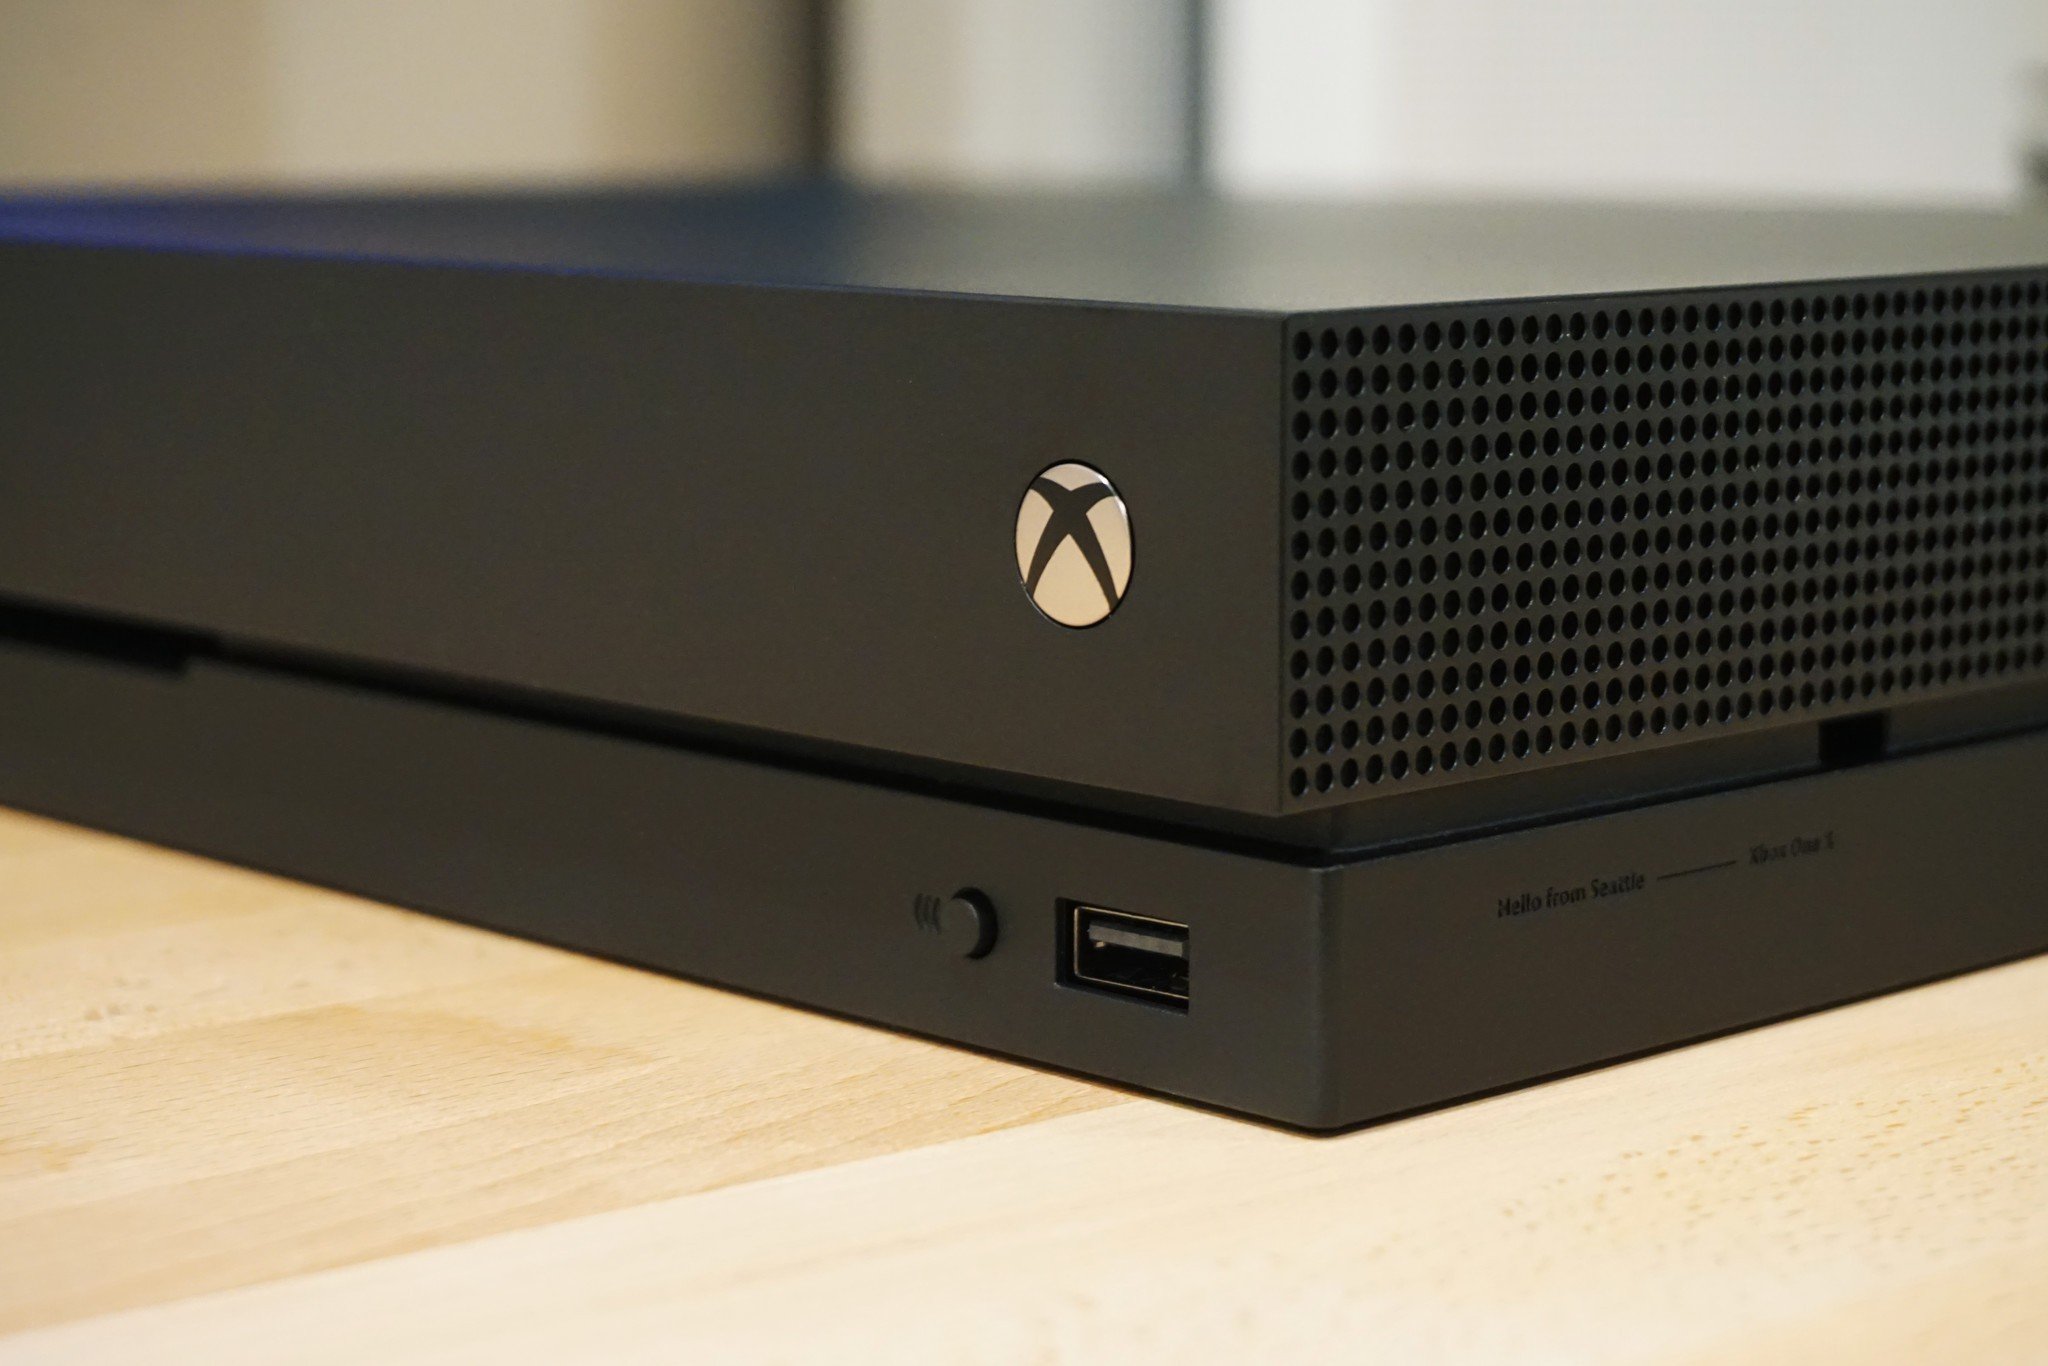 Sympathetic Clean the room Centimeter Should you buy an Xbox One X in 2022? | Windows Central